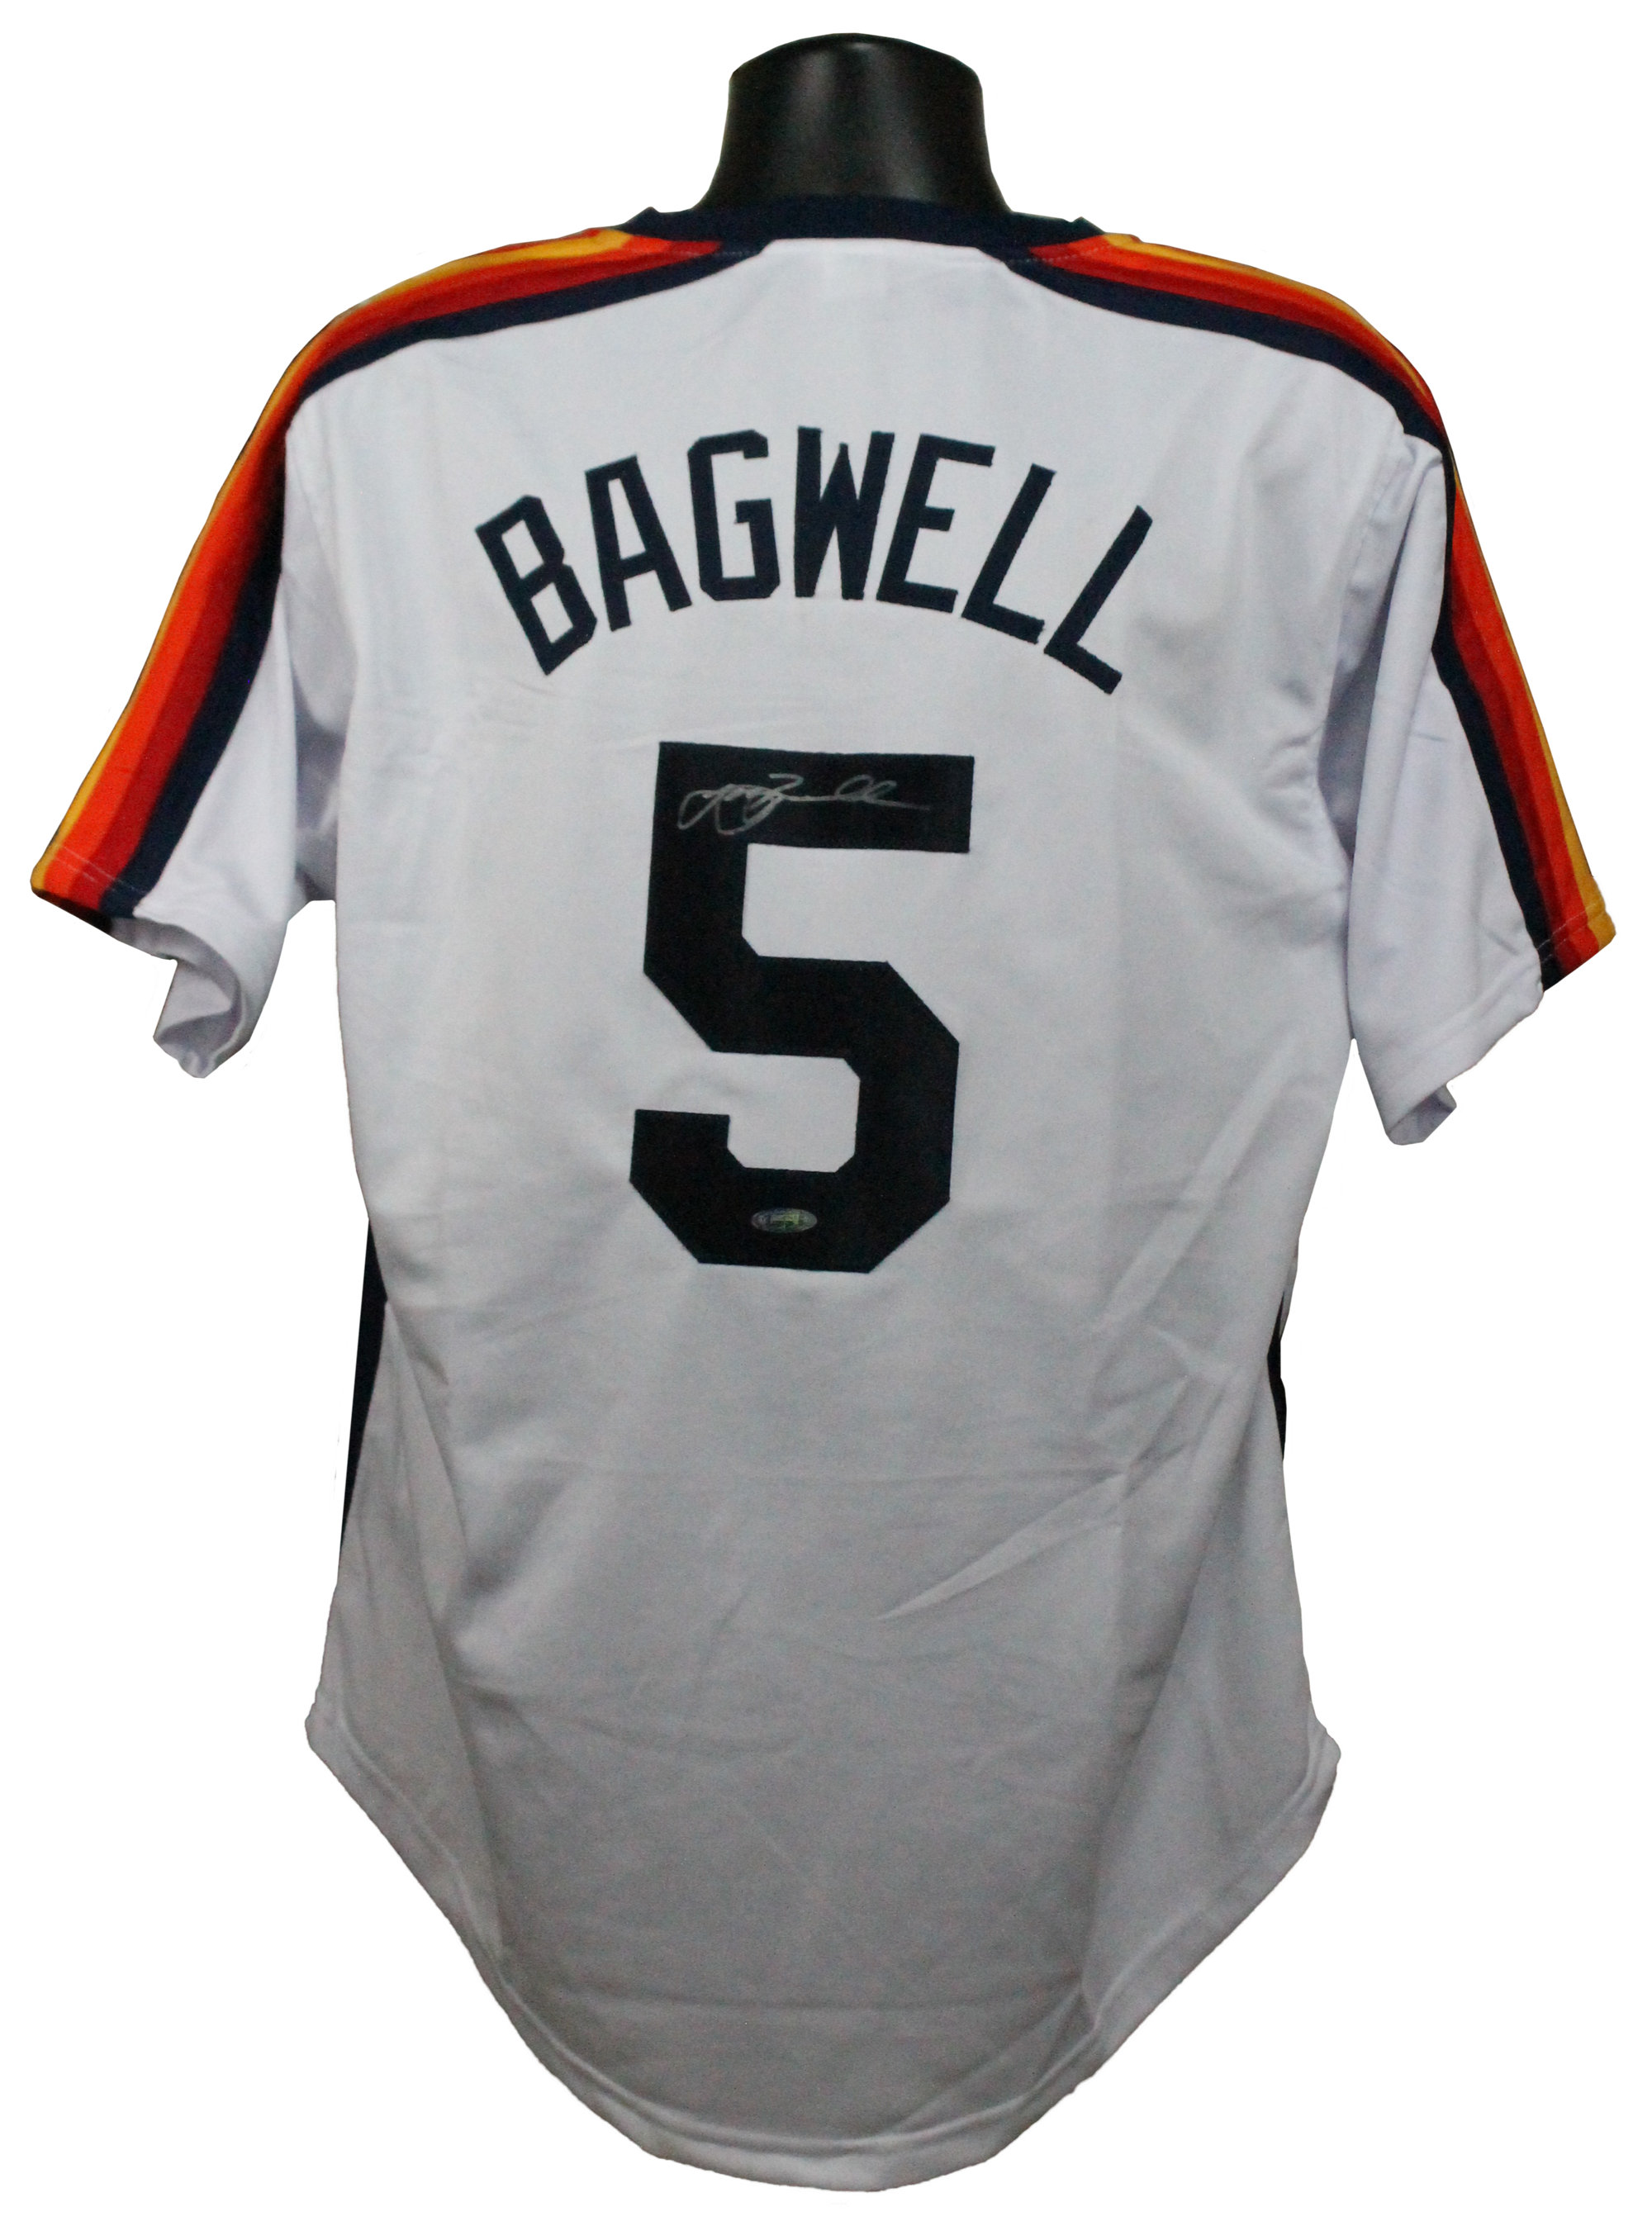 astros bagwell jersey